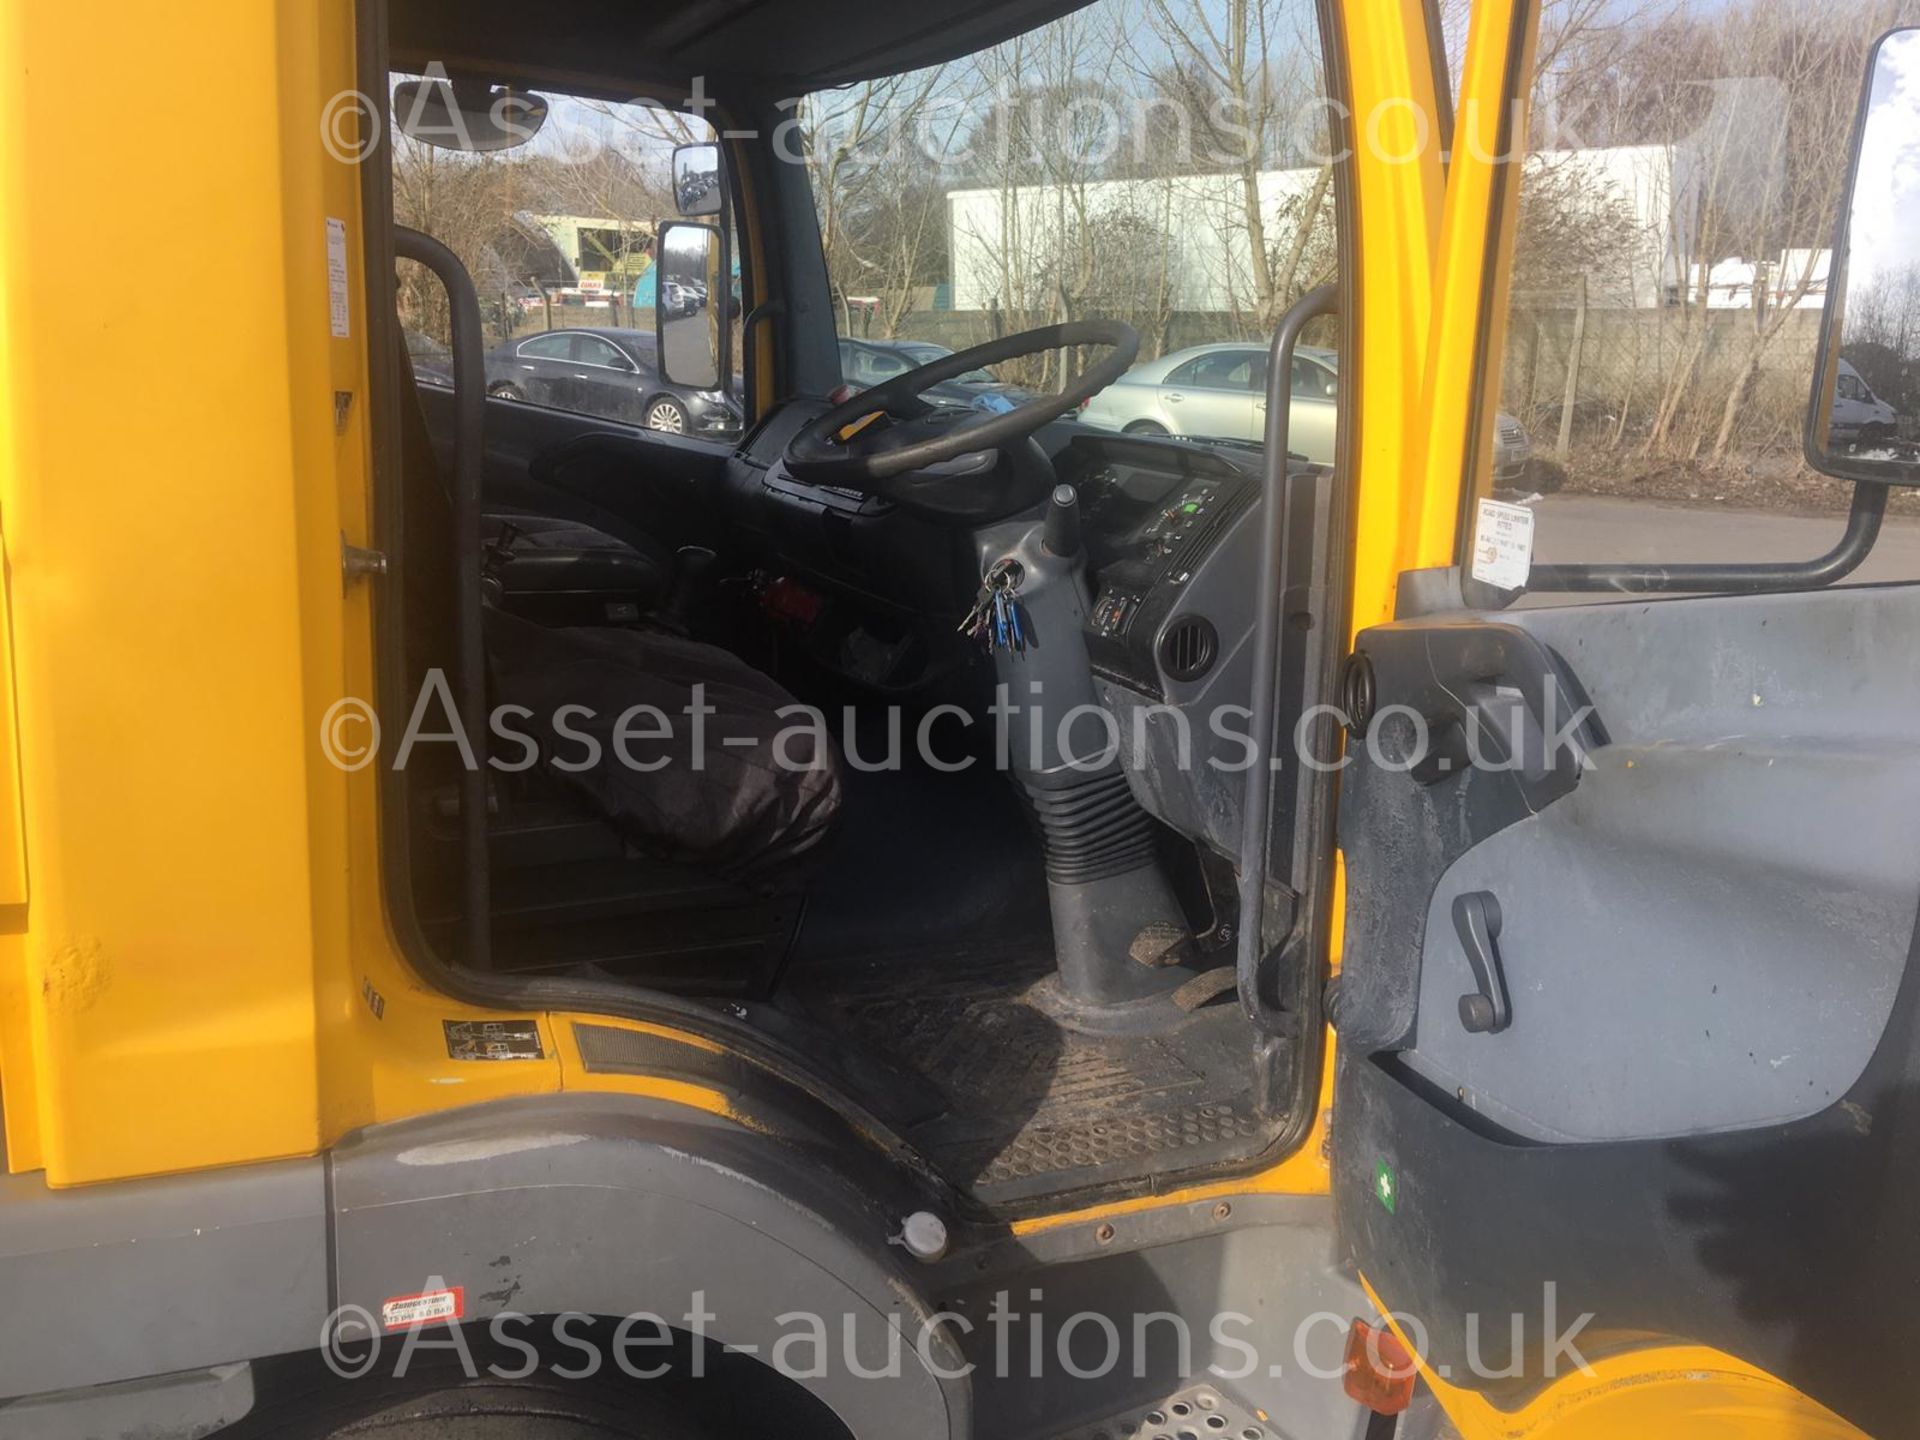 2004/54 REG MERCEDES ATEGO 1018 DAY YELLOW DROPSIDE LINE PAINTING LORRY 4.3L DIESEL ENGINE *NO VAT* - Image 59 of 128